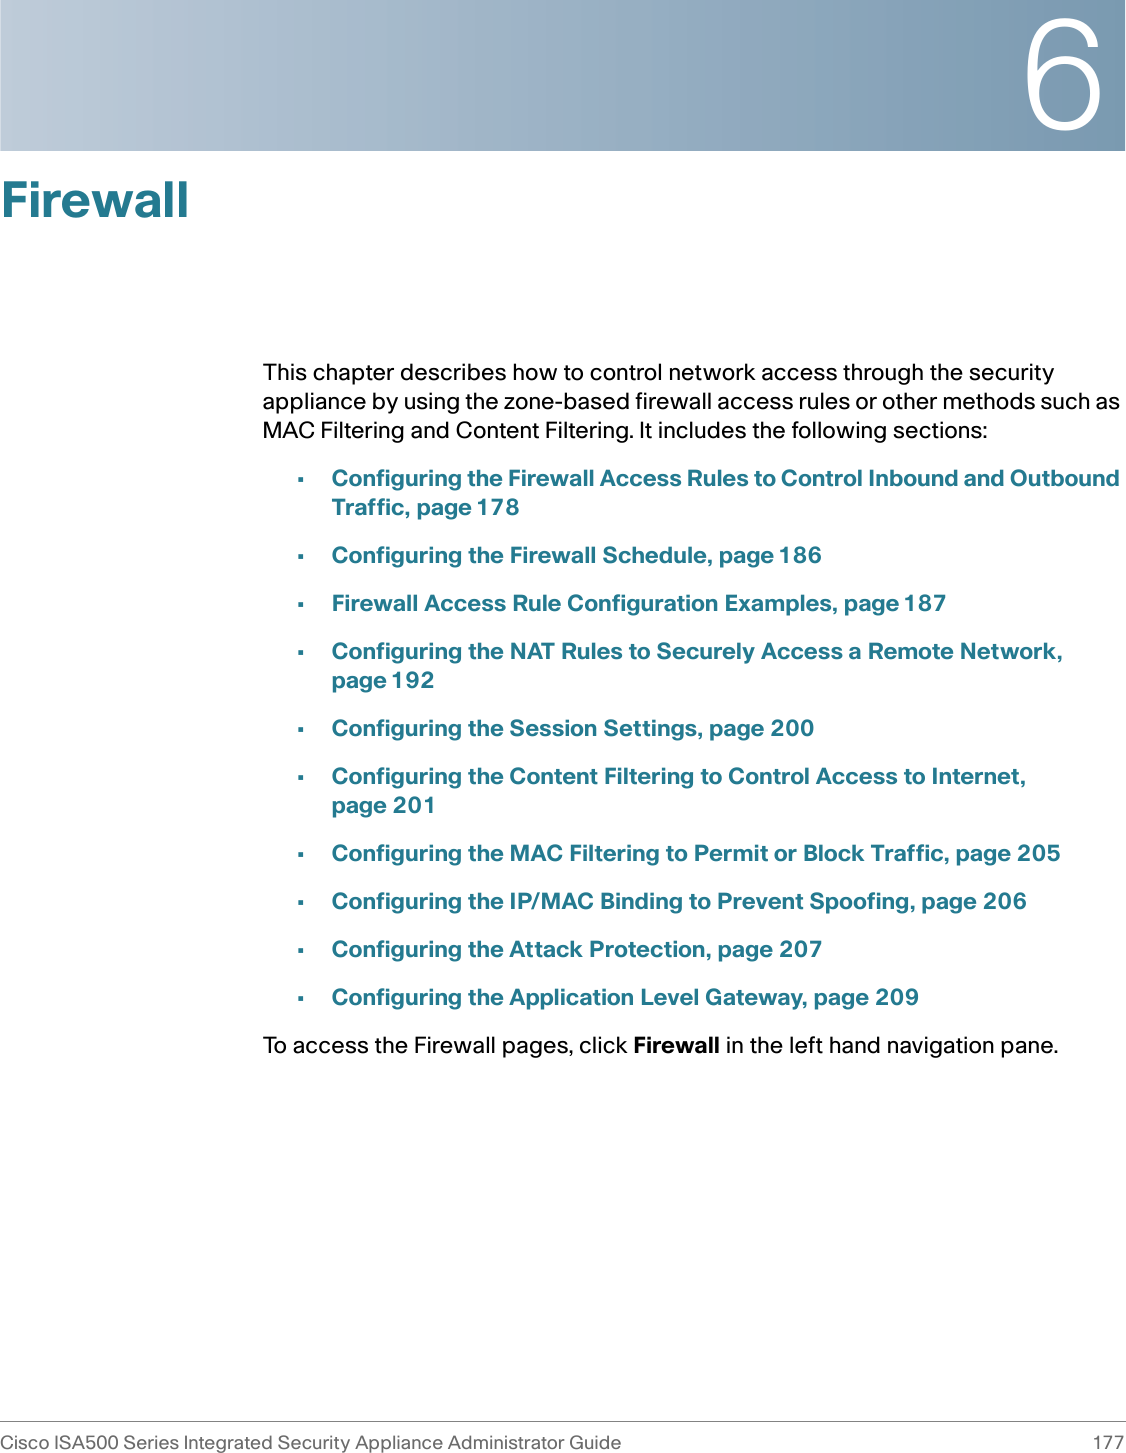 6Cisco ISA500 Series Integrated Security Appliance Administrator Guide 177 FirewallThis chapter describes how to control network access through the security appliance by using the zone-based firewall access rules or other methods such as MAC Filtering and Content Filtering. It includes the following sections: •Configuring the Firewall Access Rules to Control Inbound and Outbound Traffic, page 178•Configuring the Firewall Schedule, page 186•Firewall Access Rule Configuration Examples, page 187•Configuring the NAT Rules to Securely Access a Remote Network, page 192•Configuring the Session Settings, page 200•Configuring the Content Filtering to Control Access to Internet, page 201•Configuring the MAC Filtering to Permit or Block Traffic, page 205•Configuring the IP/MAC Binding to Prevent Spoofing, page 206•Configuring the Attack Protection, page 207•Configuring the Application Level Gateway, page 209To access the Firewall pages, click Firewall in the left hand navigation pane.